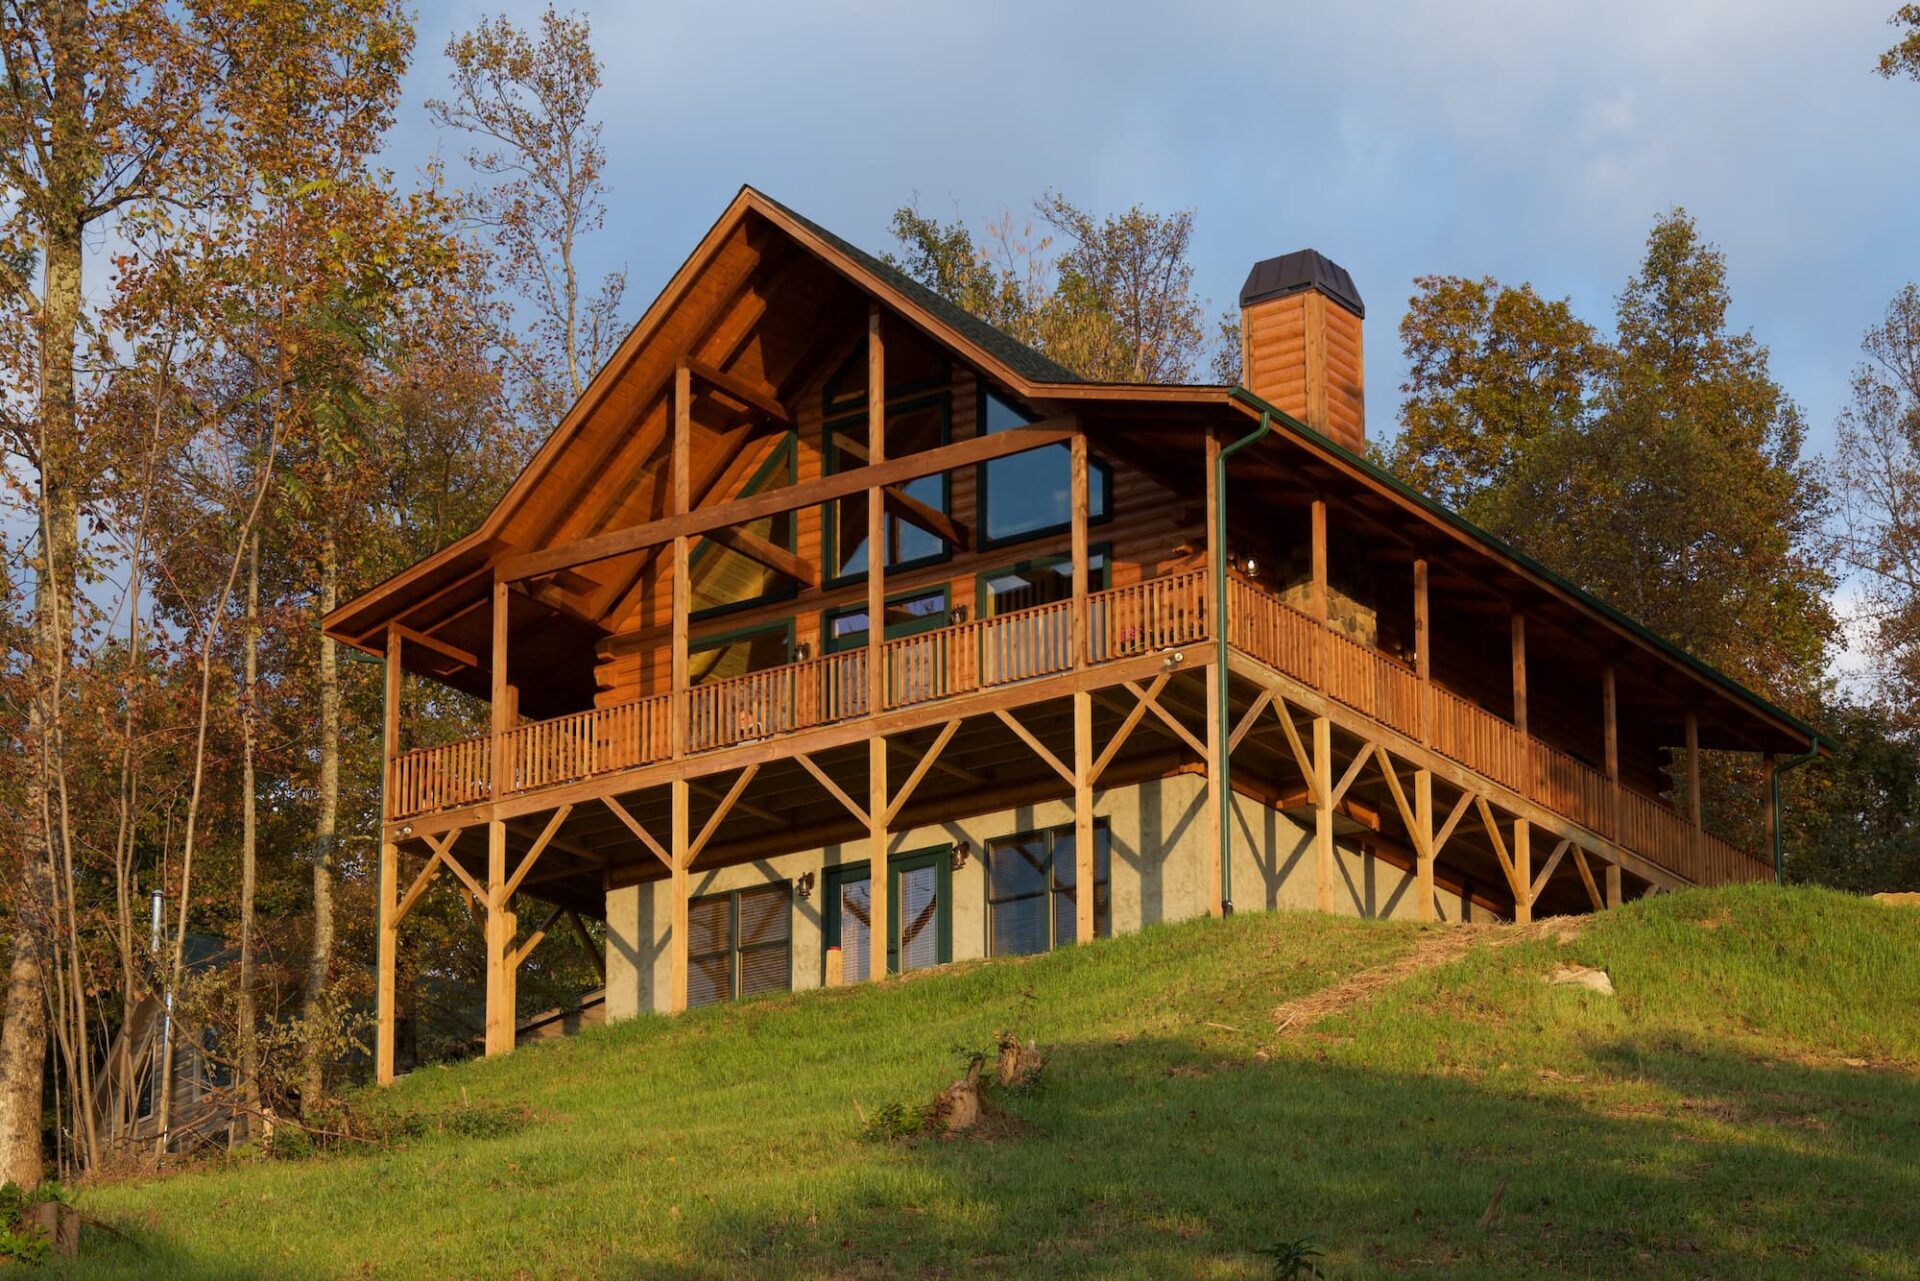 Our company crafts beautifully designed log homes, like this one nestled serenely on a picturesque hill.